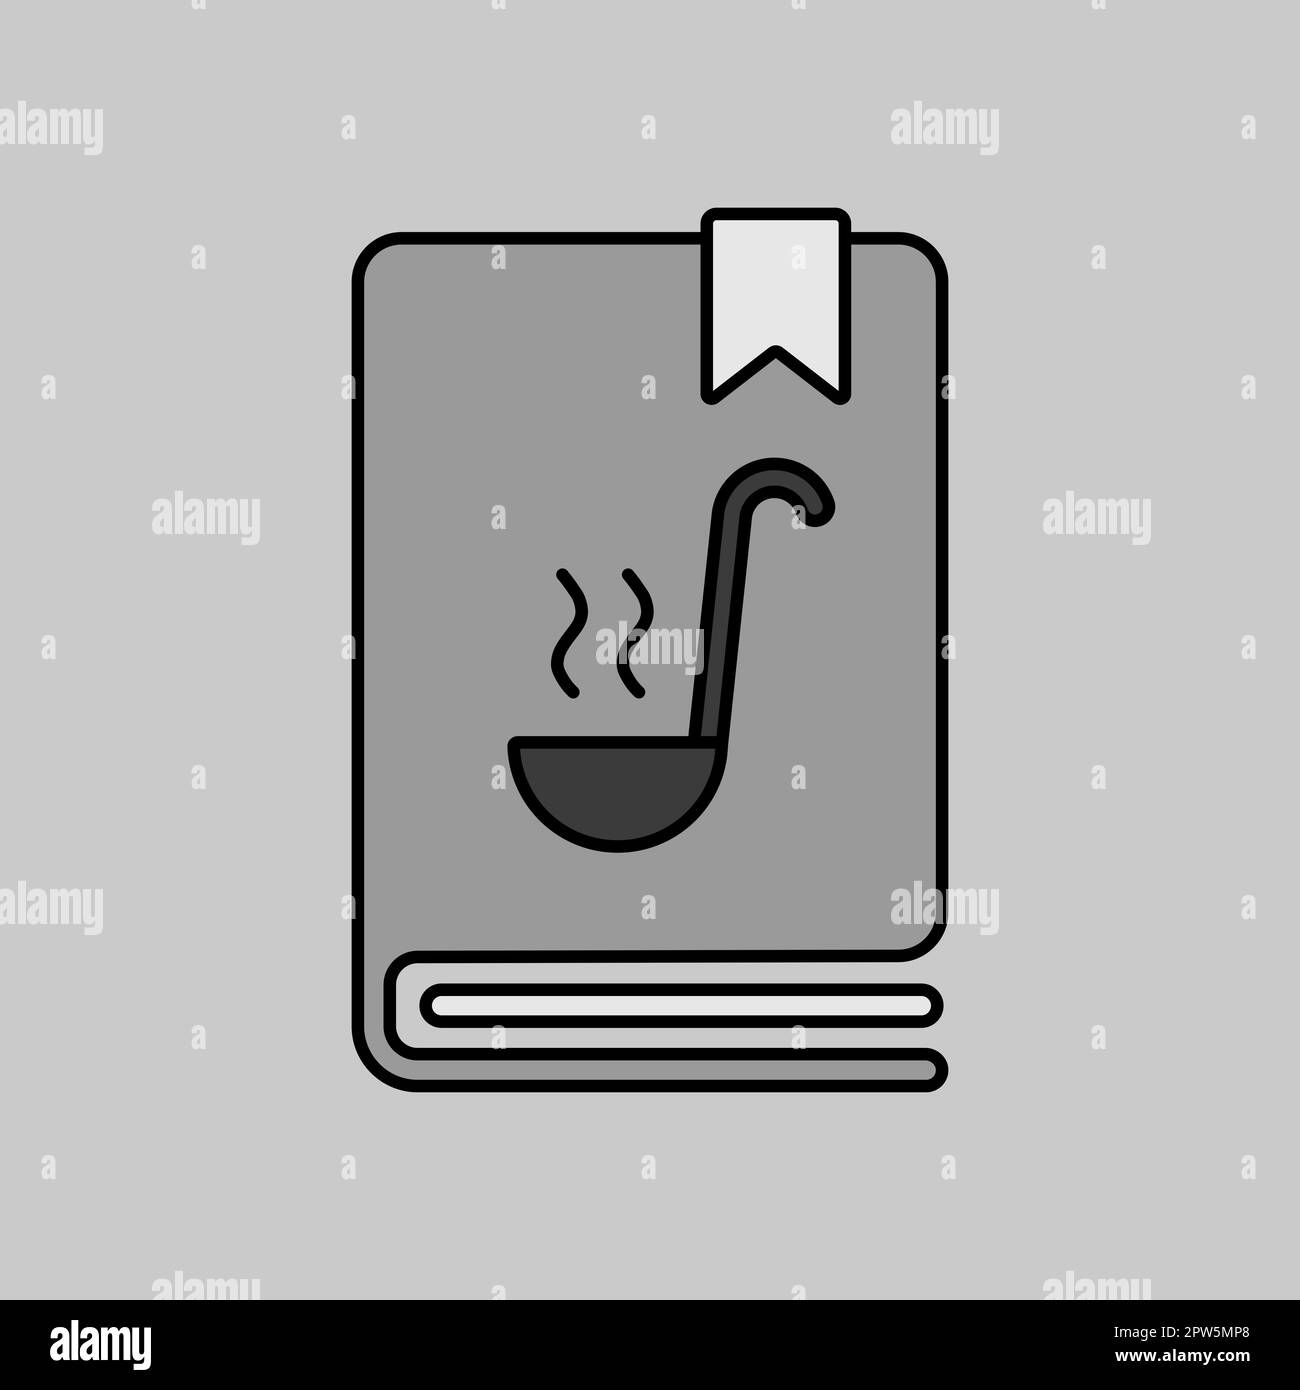 https://c8.alamy.com/comp/2PW5MP8/cookbook-or-cookery-book-vector-grayscale-icon-recipe-book-kitchen-appliance-graph-symbol-for-cooking-web-site-design-logo-app-ui-2PW5MP8.jpg